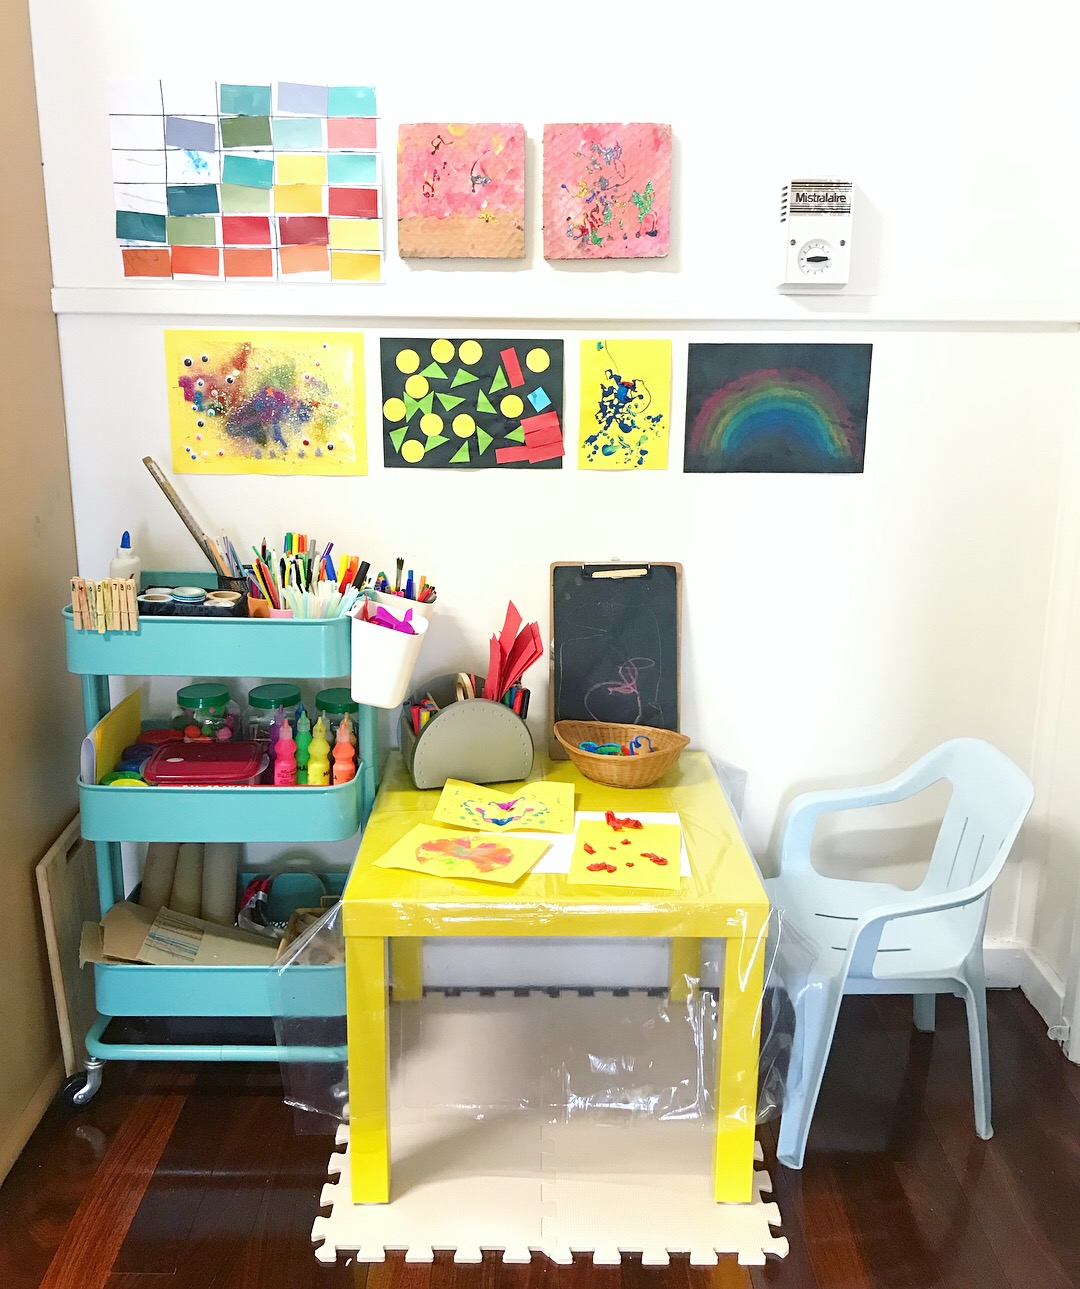 How to Make Space for Kids to be Creative at Home